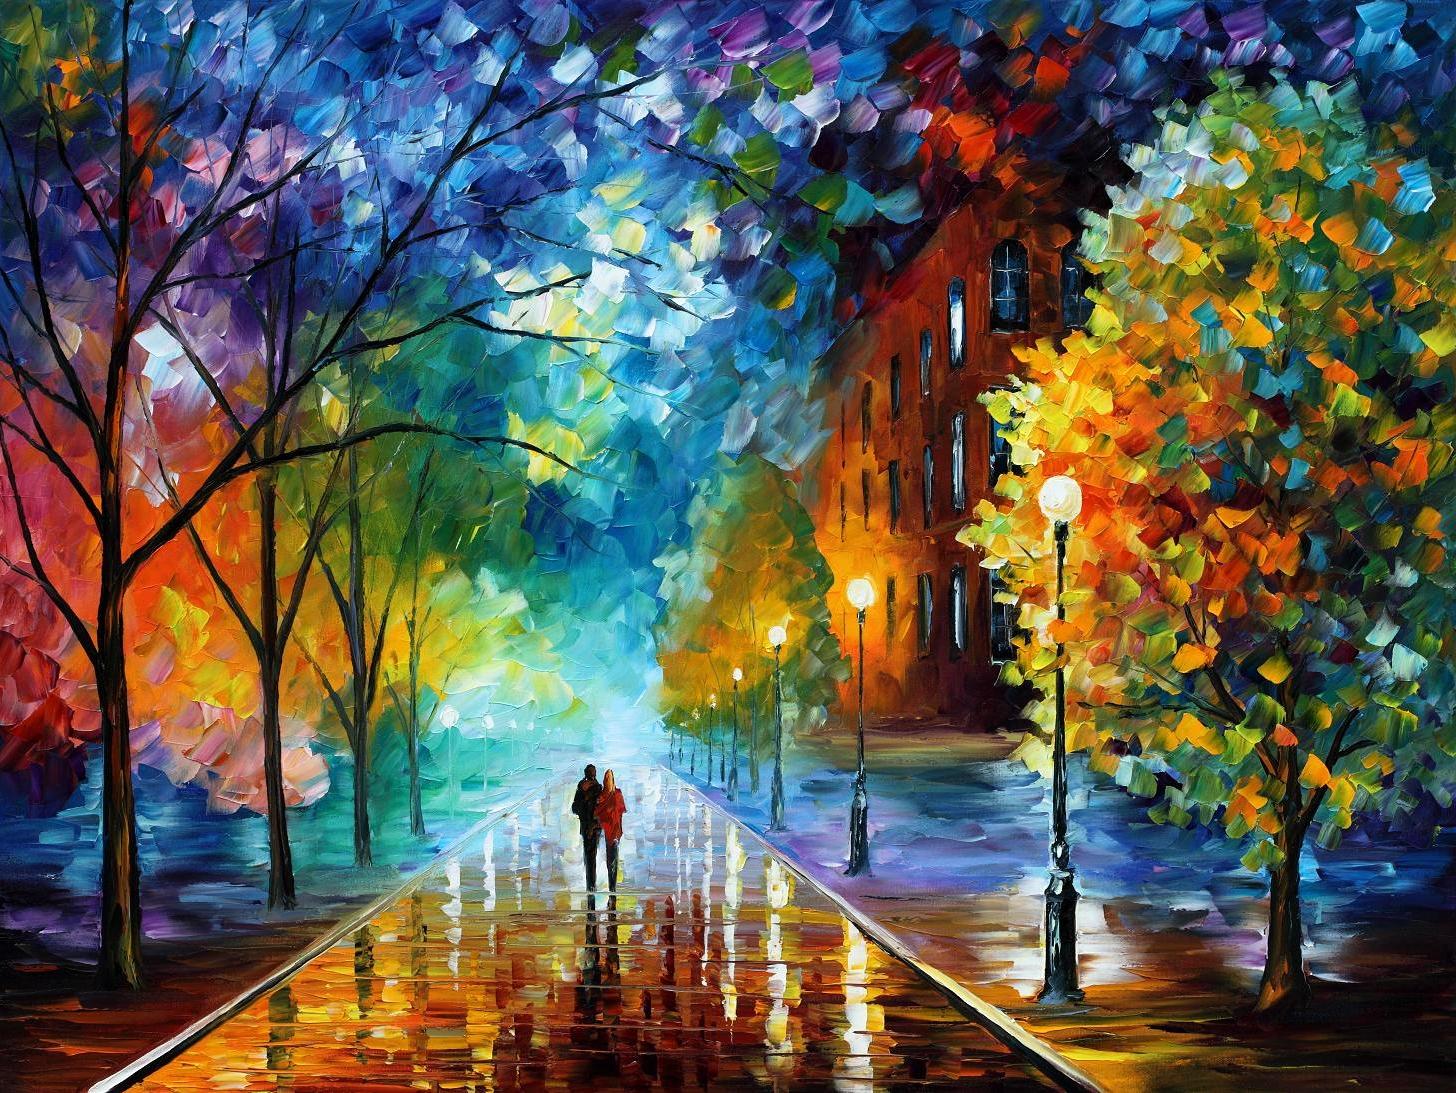 Wallpaper Paintings - Freshness Of Cold - Palette Knife Landscape Oil Painting , HD Wallpaper & Backgrounds